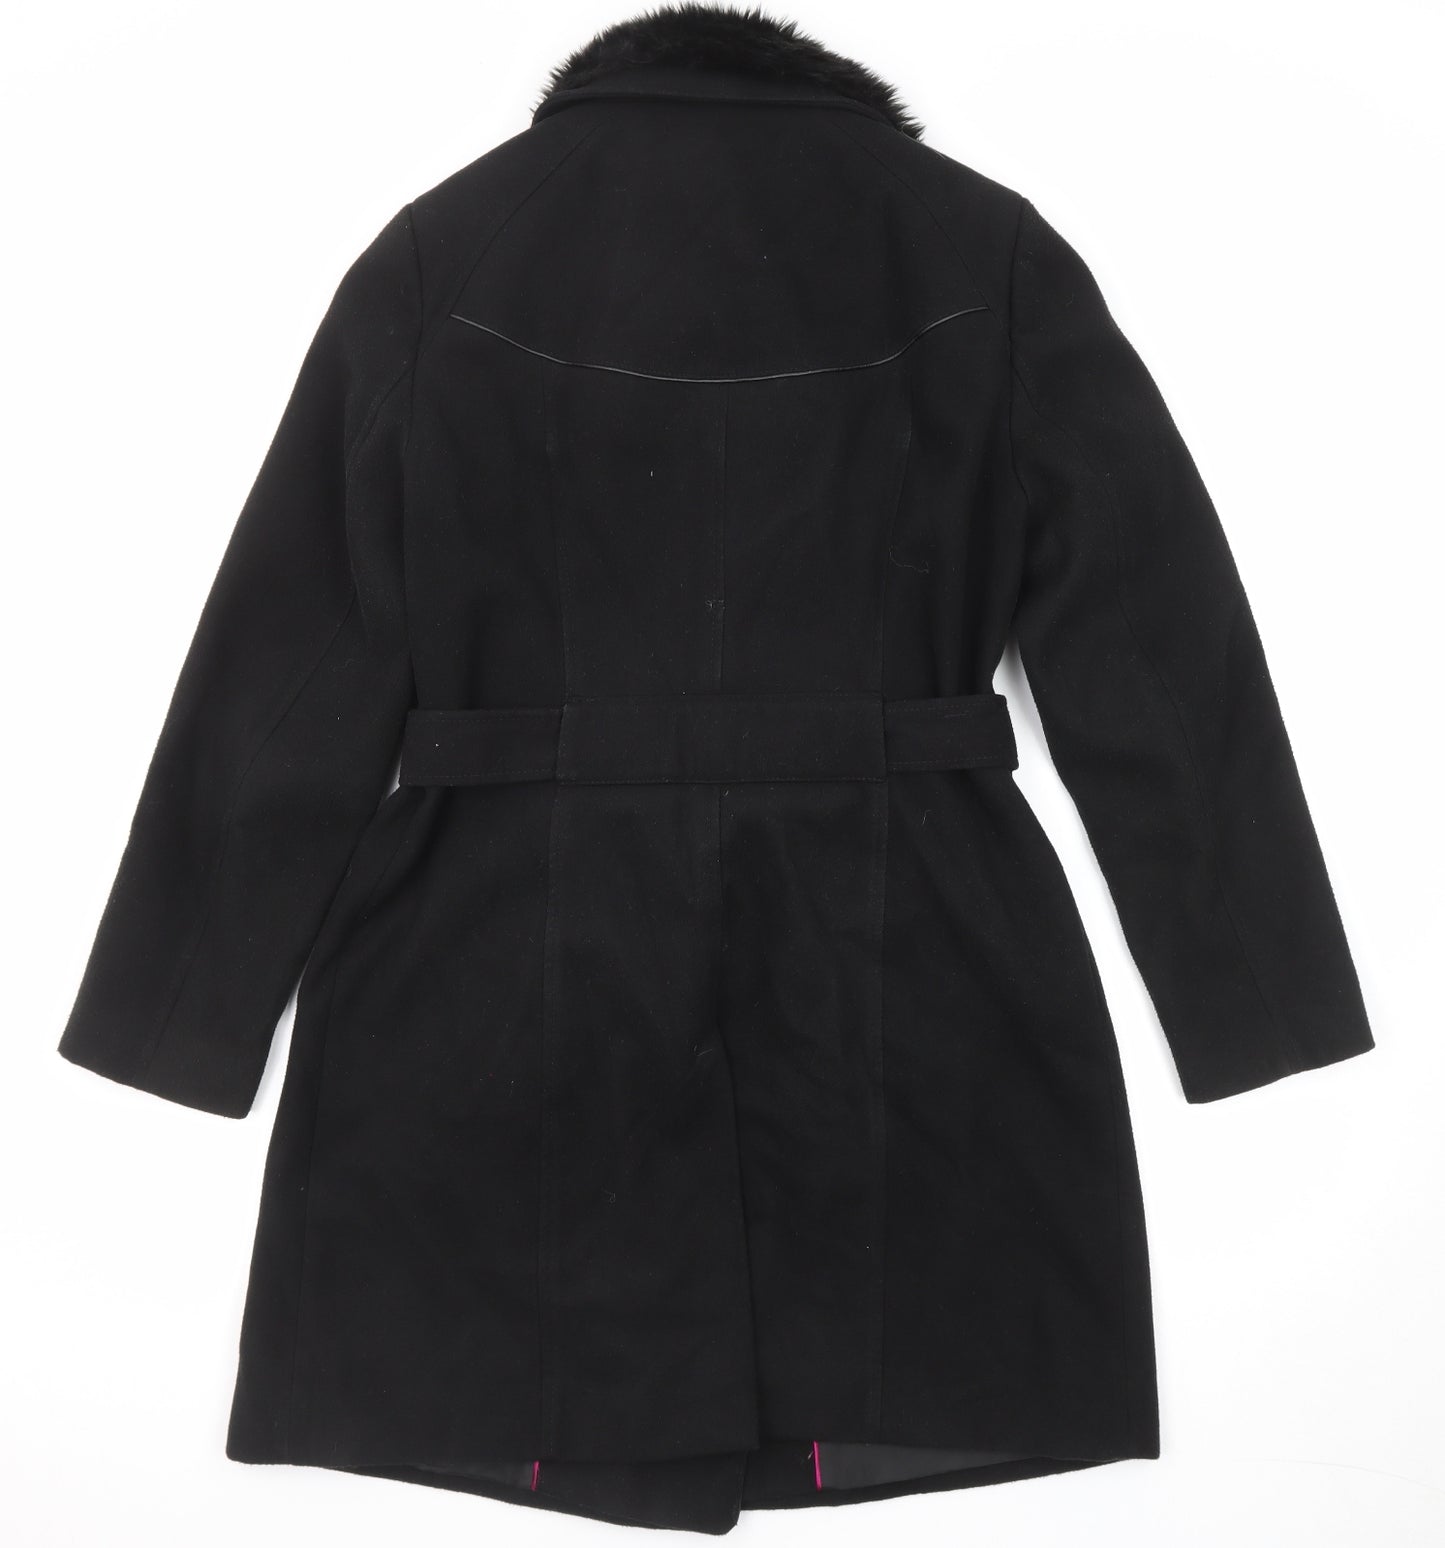 Marks and Spencer Womens Black Overcoat Coat Size 14 Button